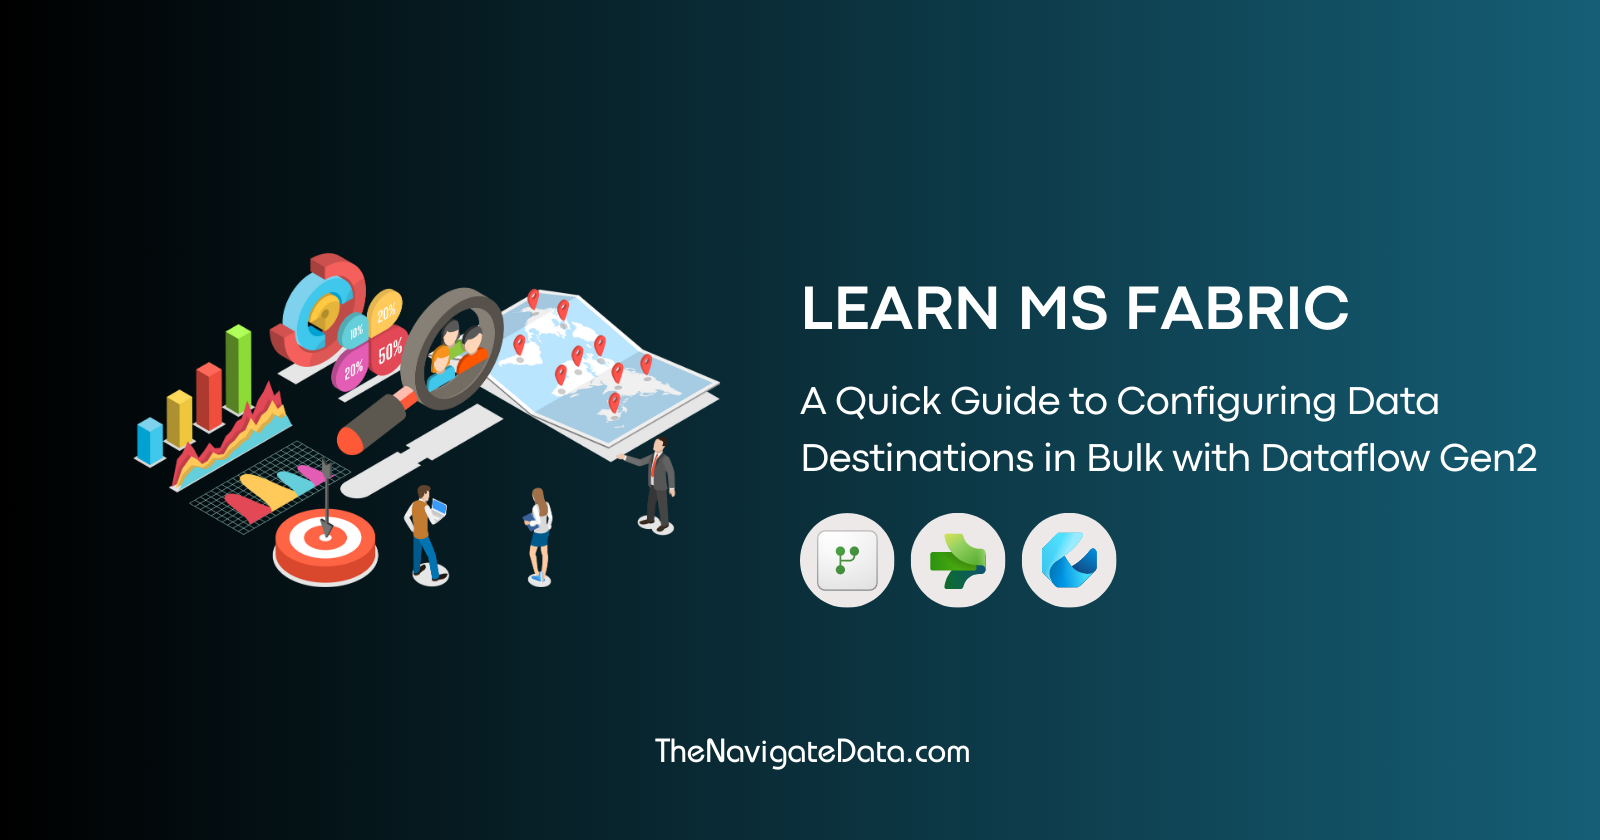 Cover Image for A Quick Guide to Configuring Data Destinations in Bulk with MS Fabric Dataflow Gen2